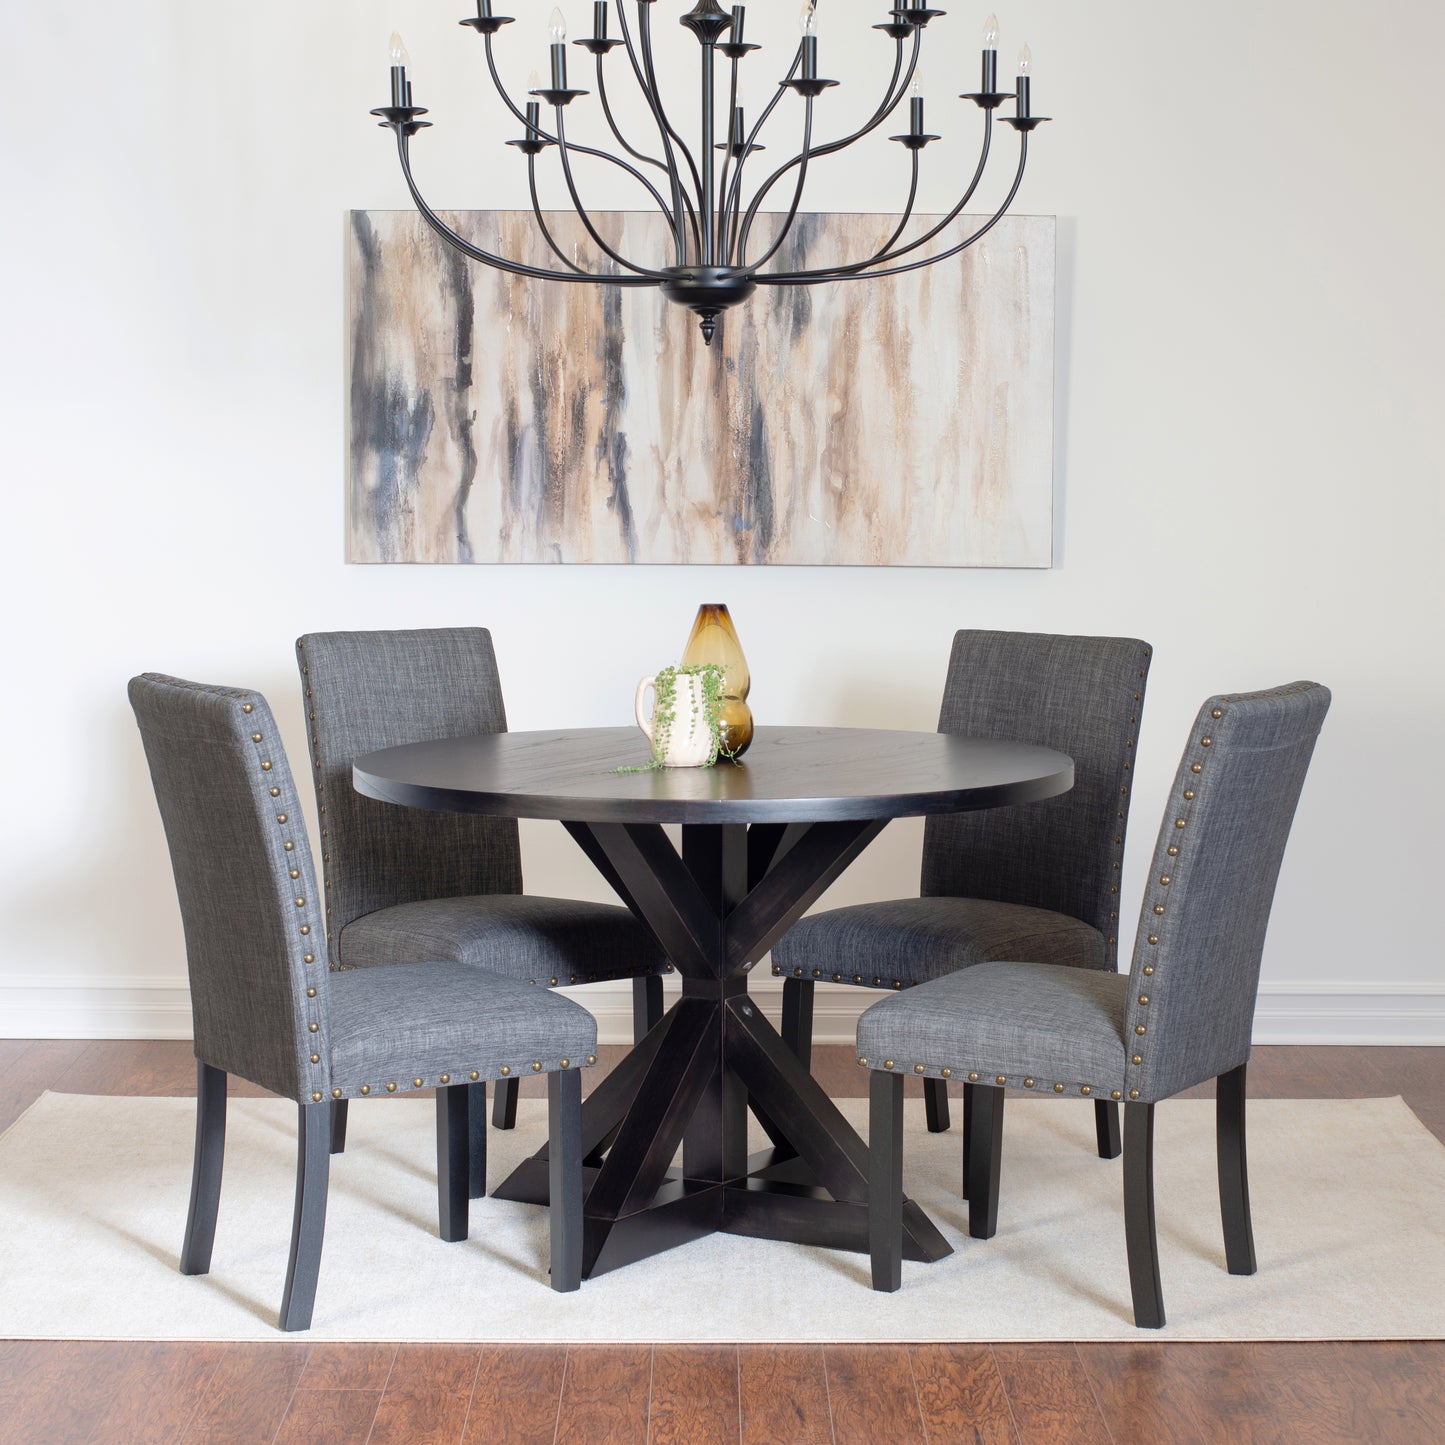 Mytzi 5-piece Dining Set, Cross-Buck Dining Table with 4 Stylish Chairs